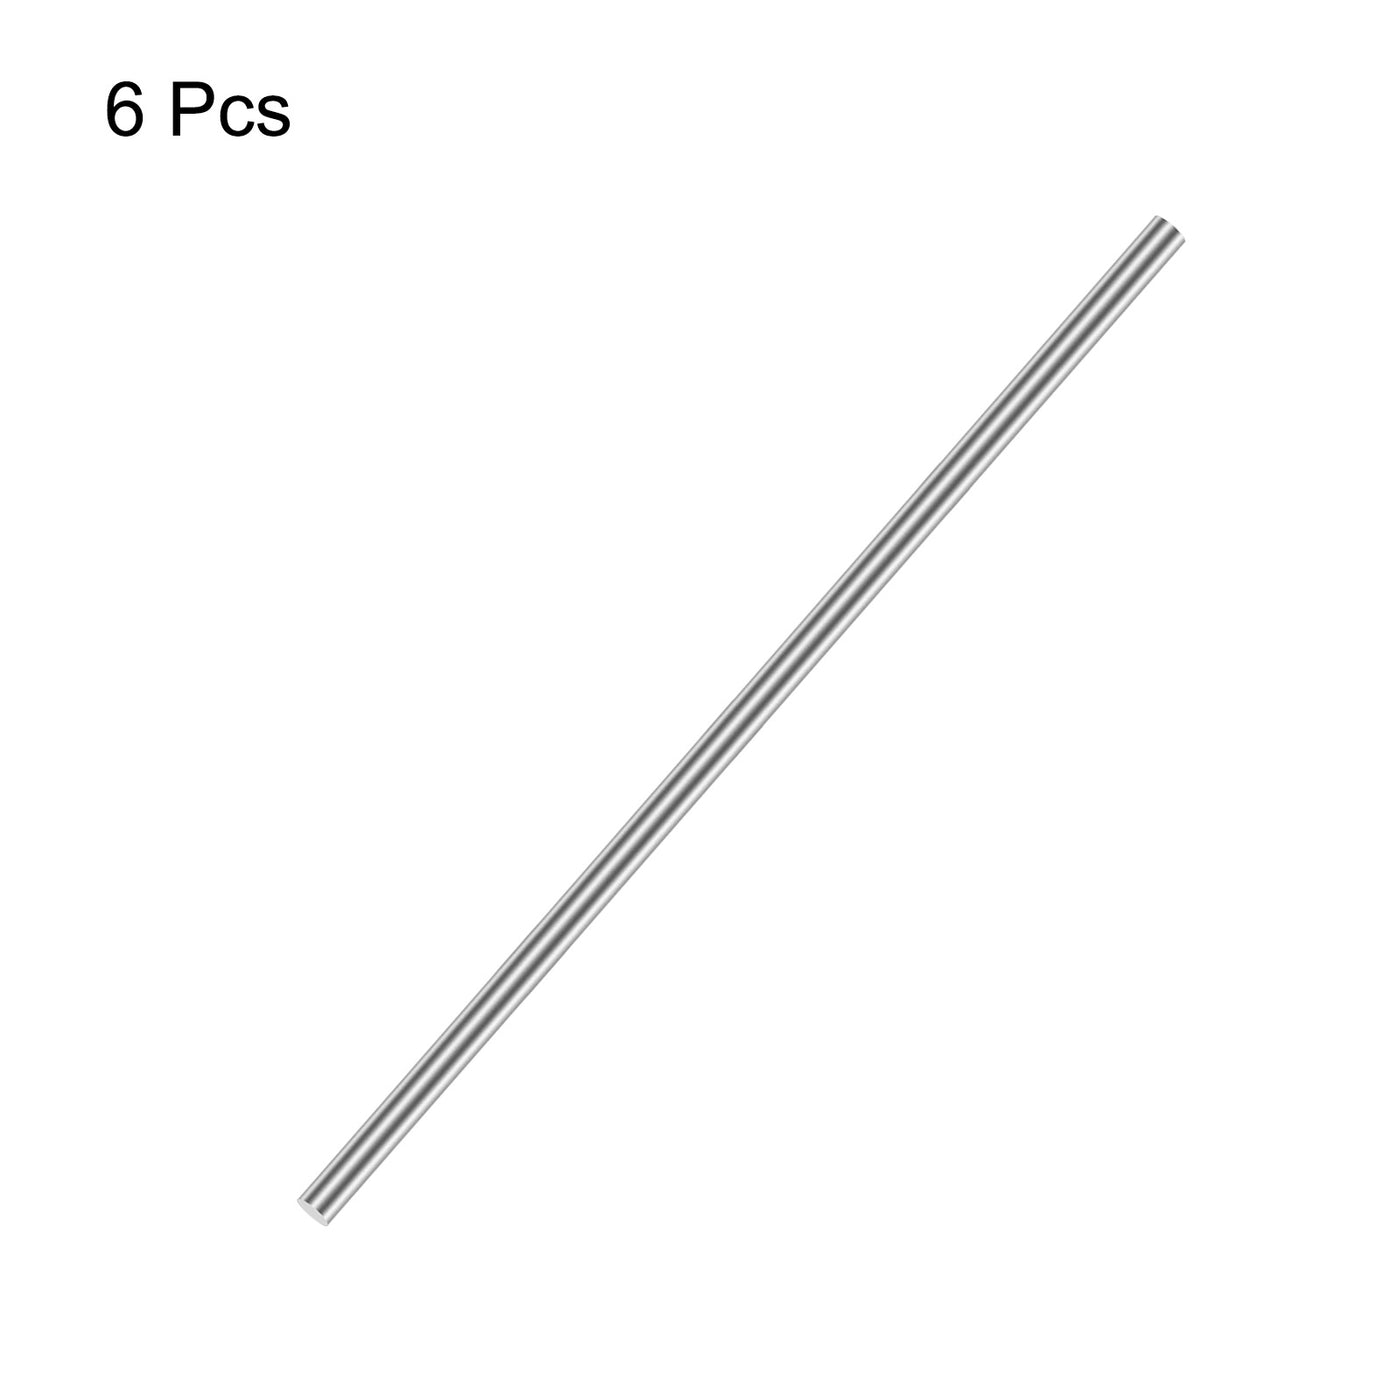 uxcell Uxcell 3mm x 400mm(1/8" x 16") 304 Stainless Steel Solid Round Rod for DIY Craft - 6pcs